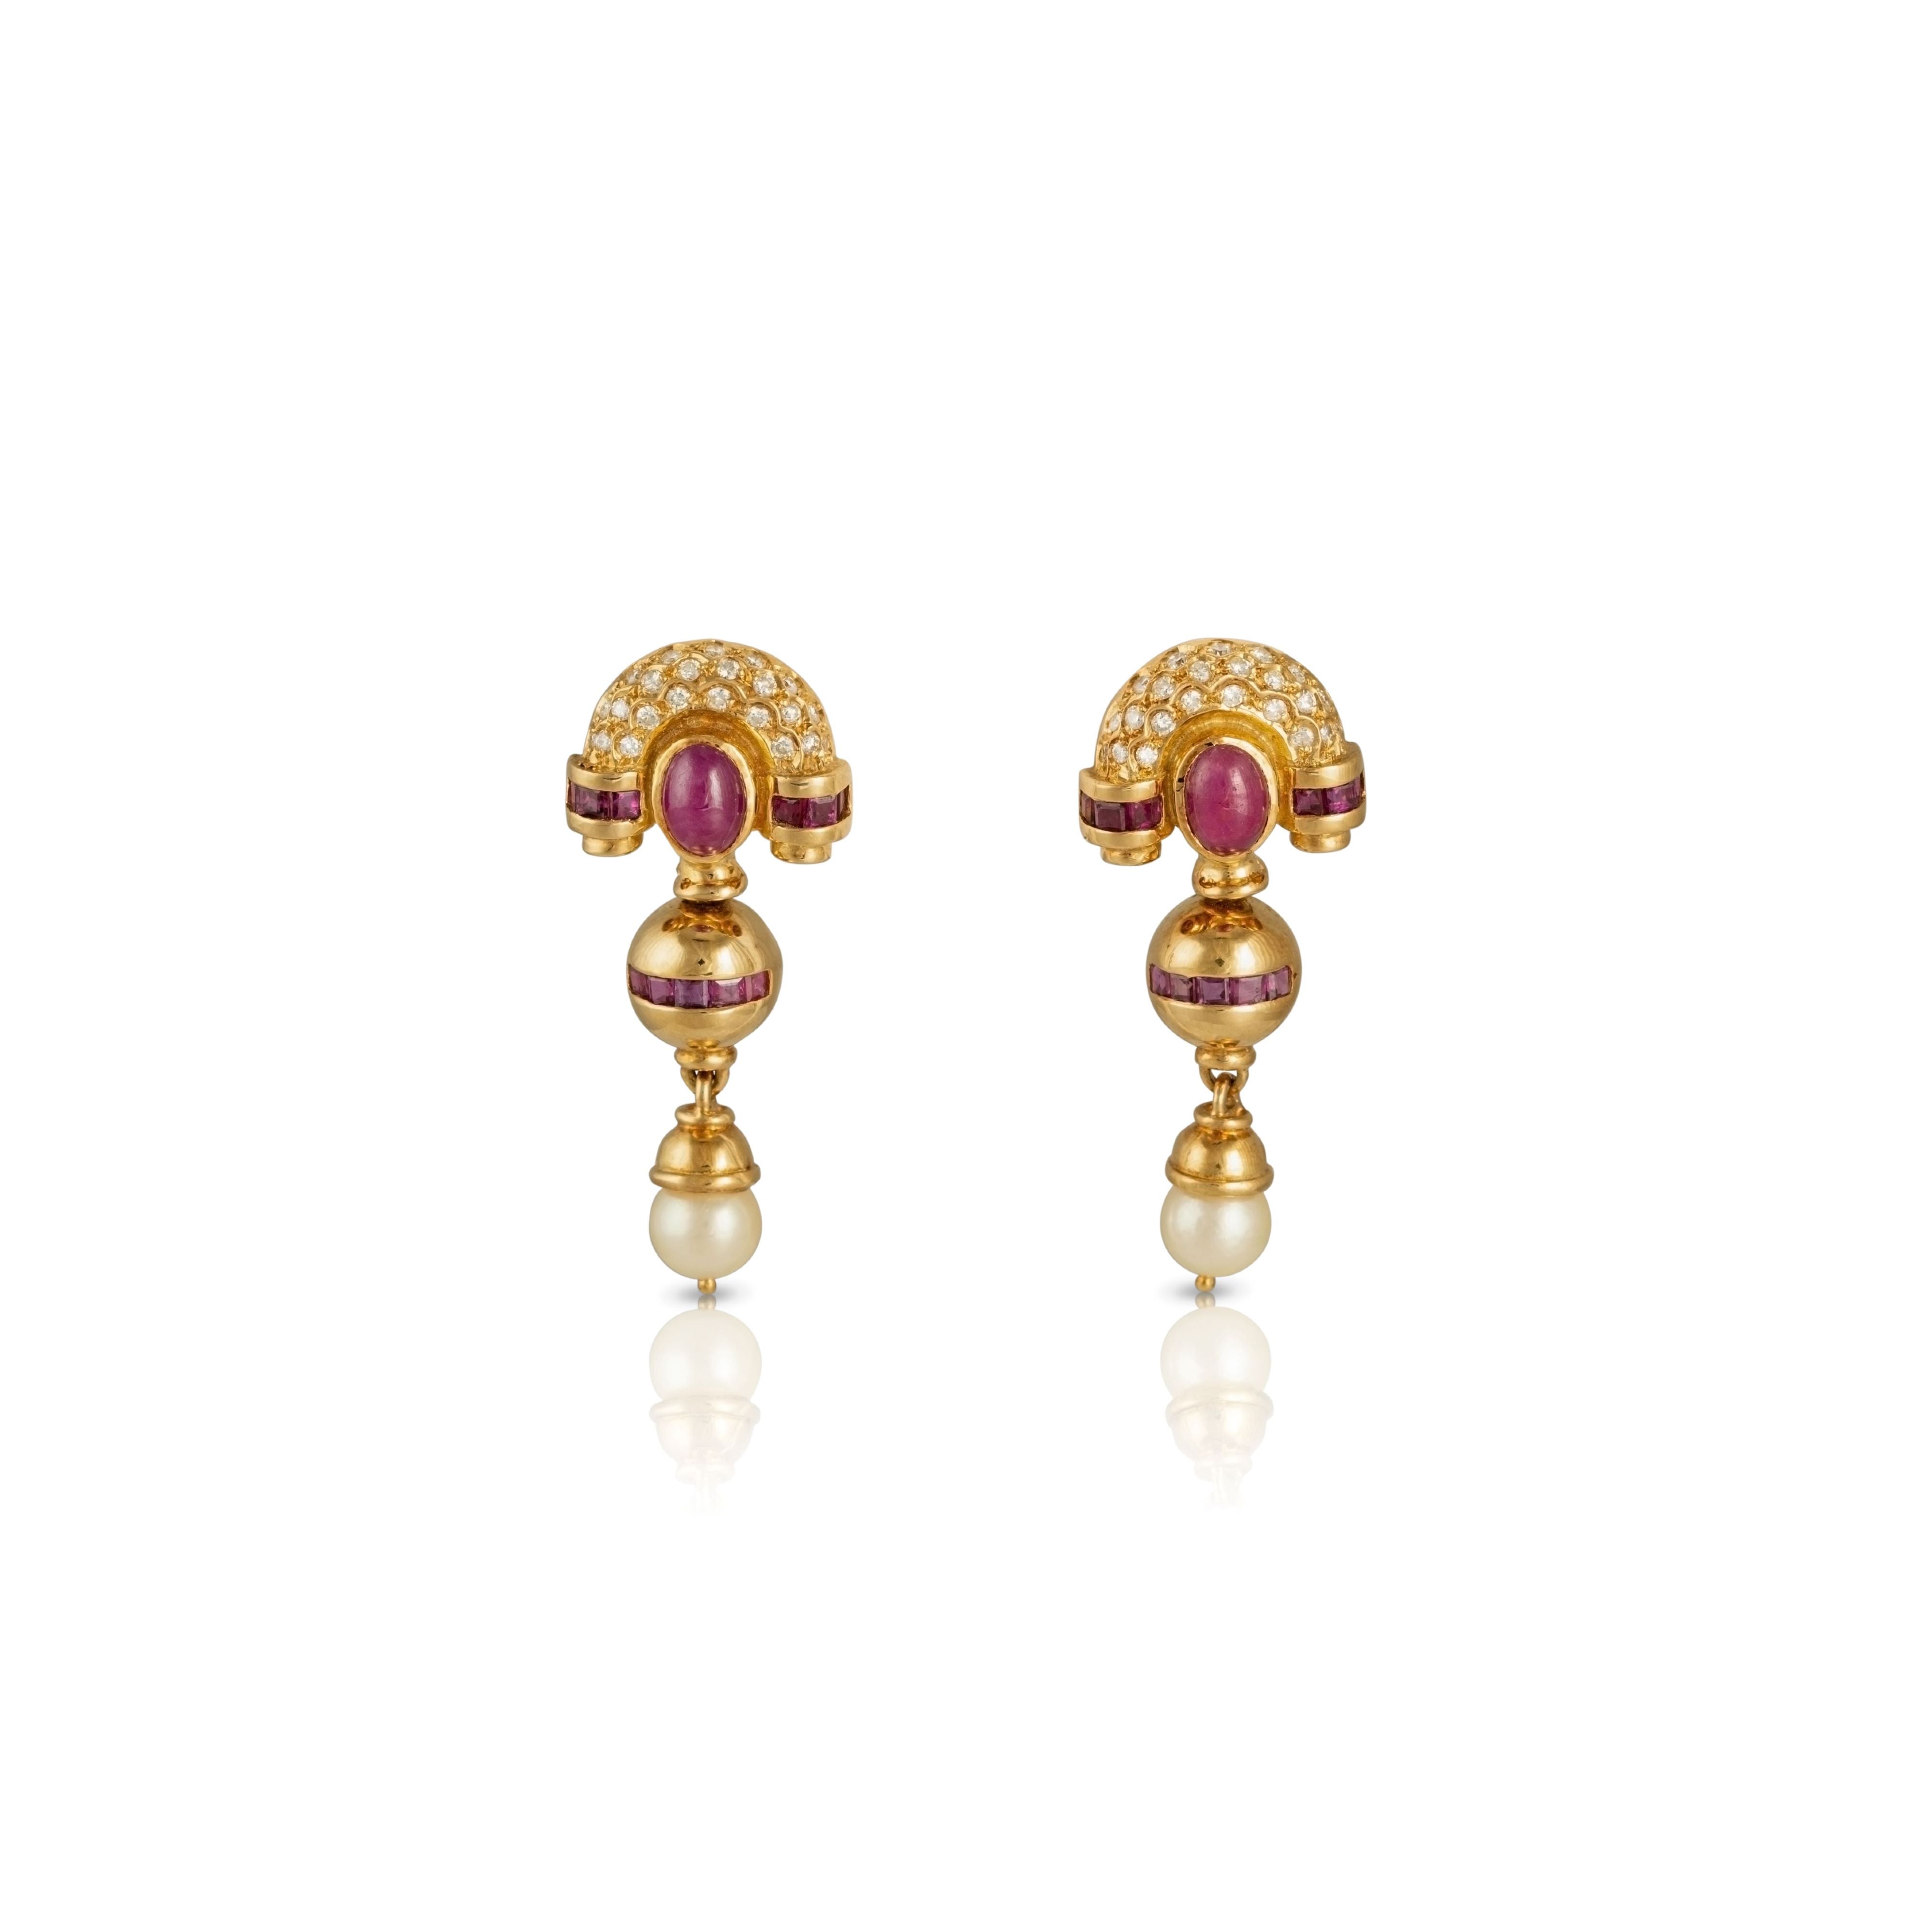 Pearl dangle earrings in 18ct gold with rubies and diamonds.